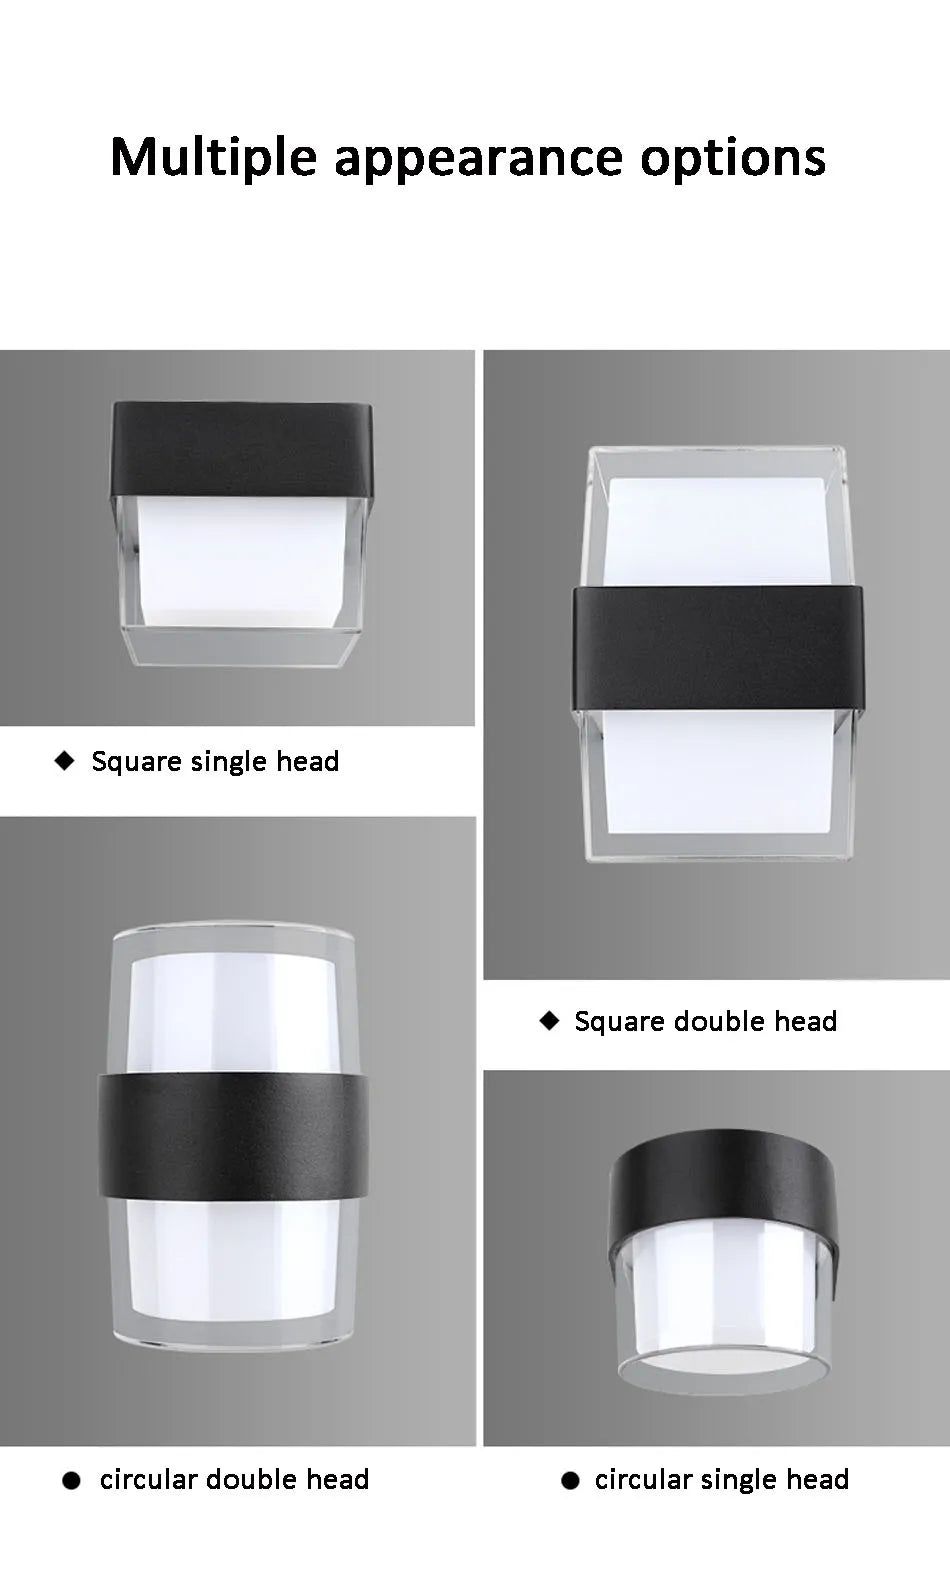 Led Wall Light, Four design options: square single-head, square double-head, circular single-head, and circular double-head.